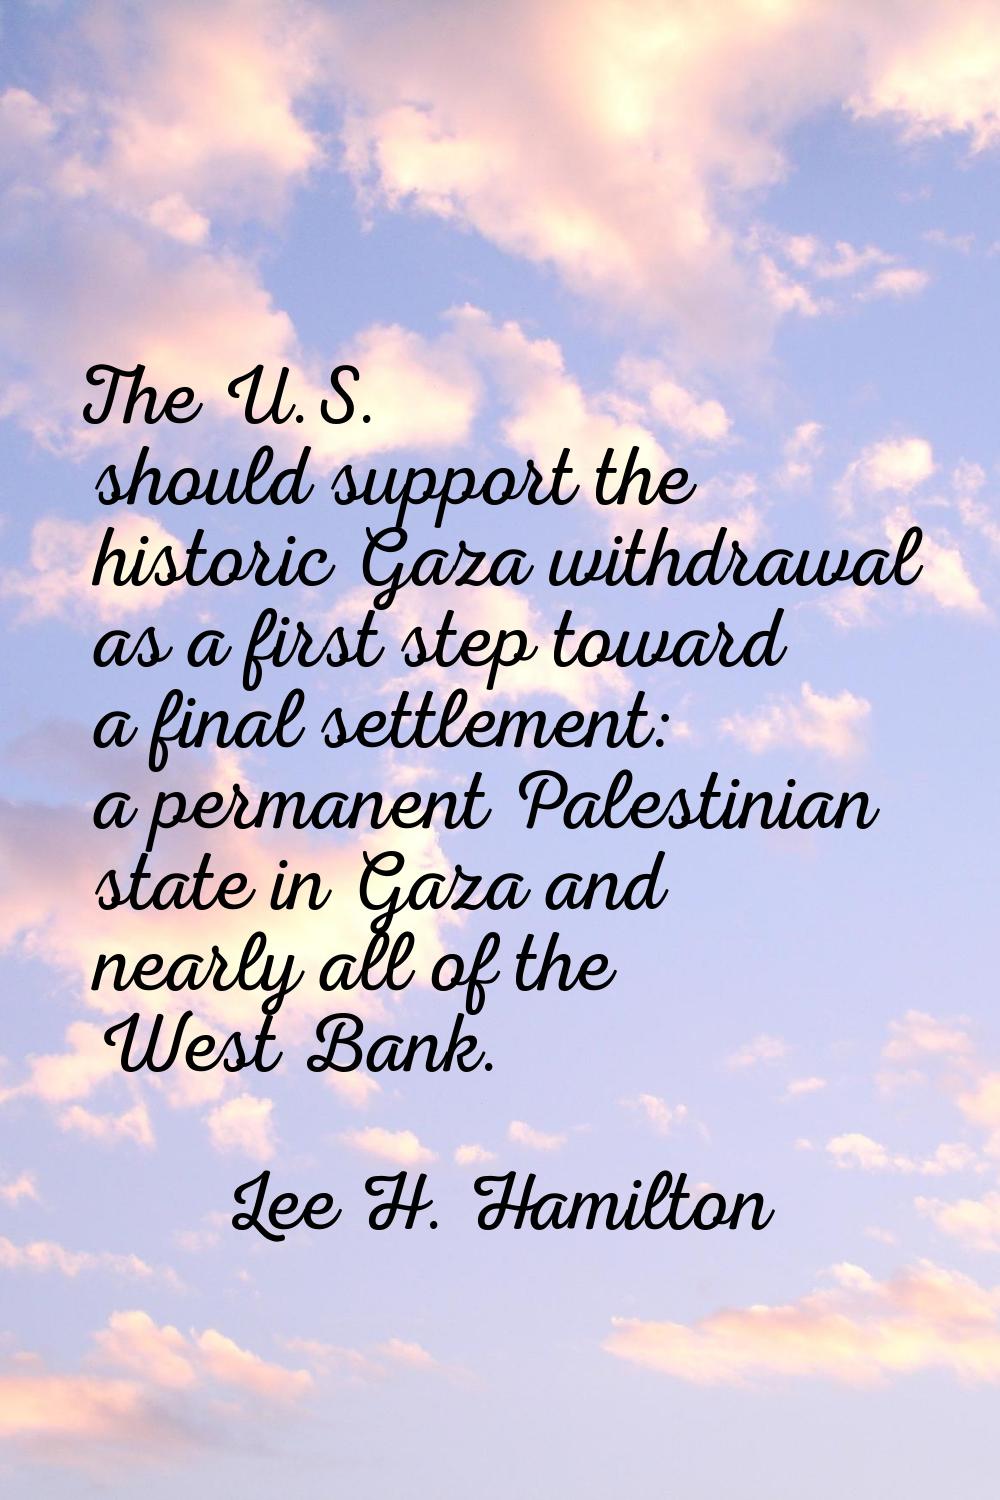 The U.S. should support the historic Gaza withdrawal as a first step toward a final settlement: a p